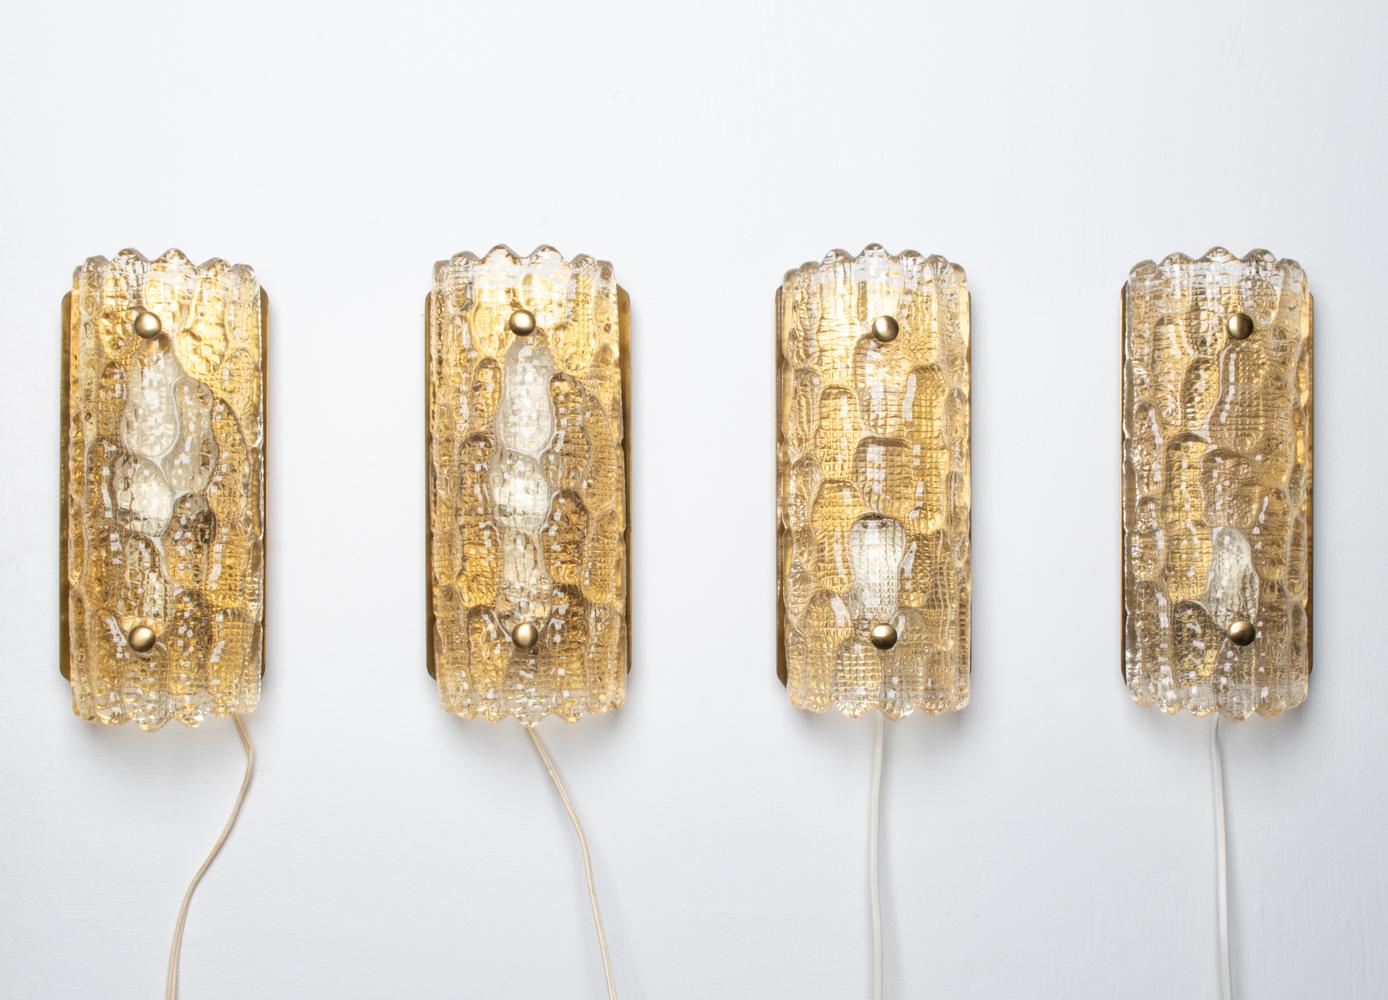 This exquisite set of (4) sconces was designed by Carl Fagerlund for Orrefors and produced in the 1960's. Each sconce features a single socket behind a curved pane of thick clear glass, molded with a pebbled ice floe texture on the front and an